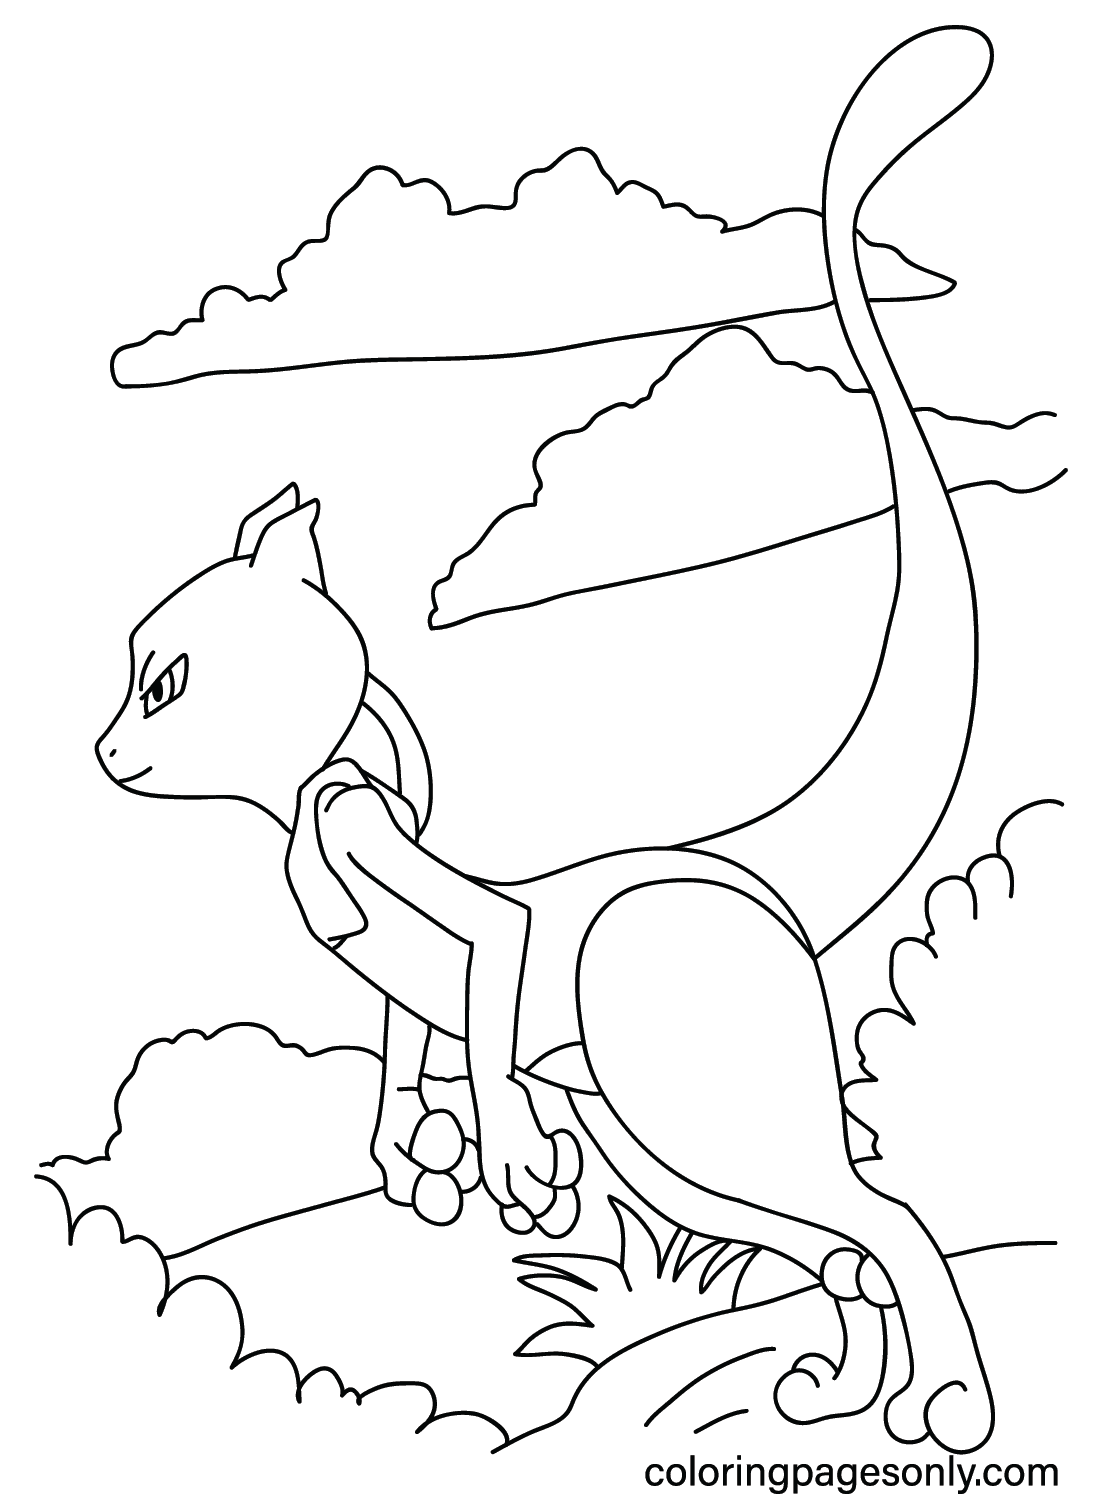 Print Mewtwo Coloring Page from Mewtwo